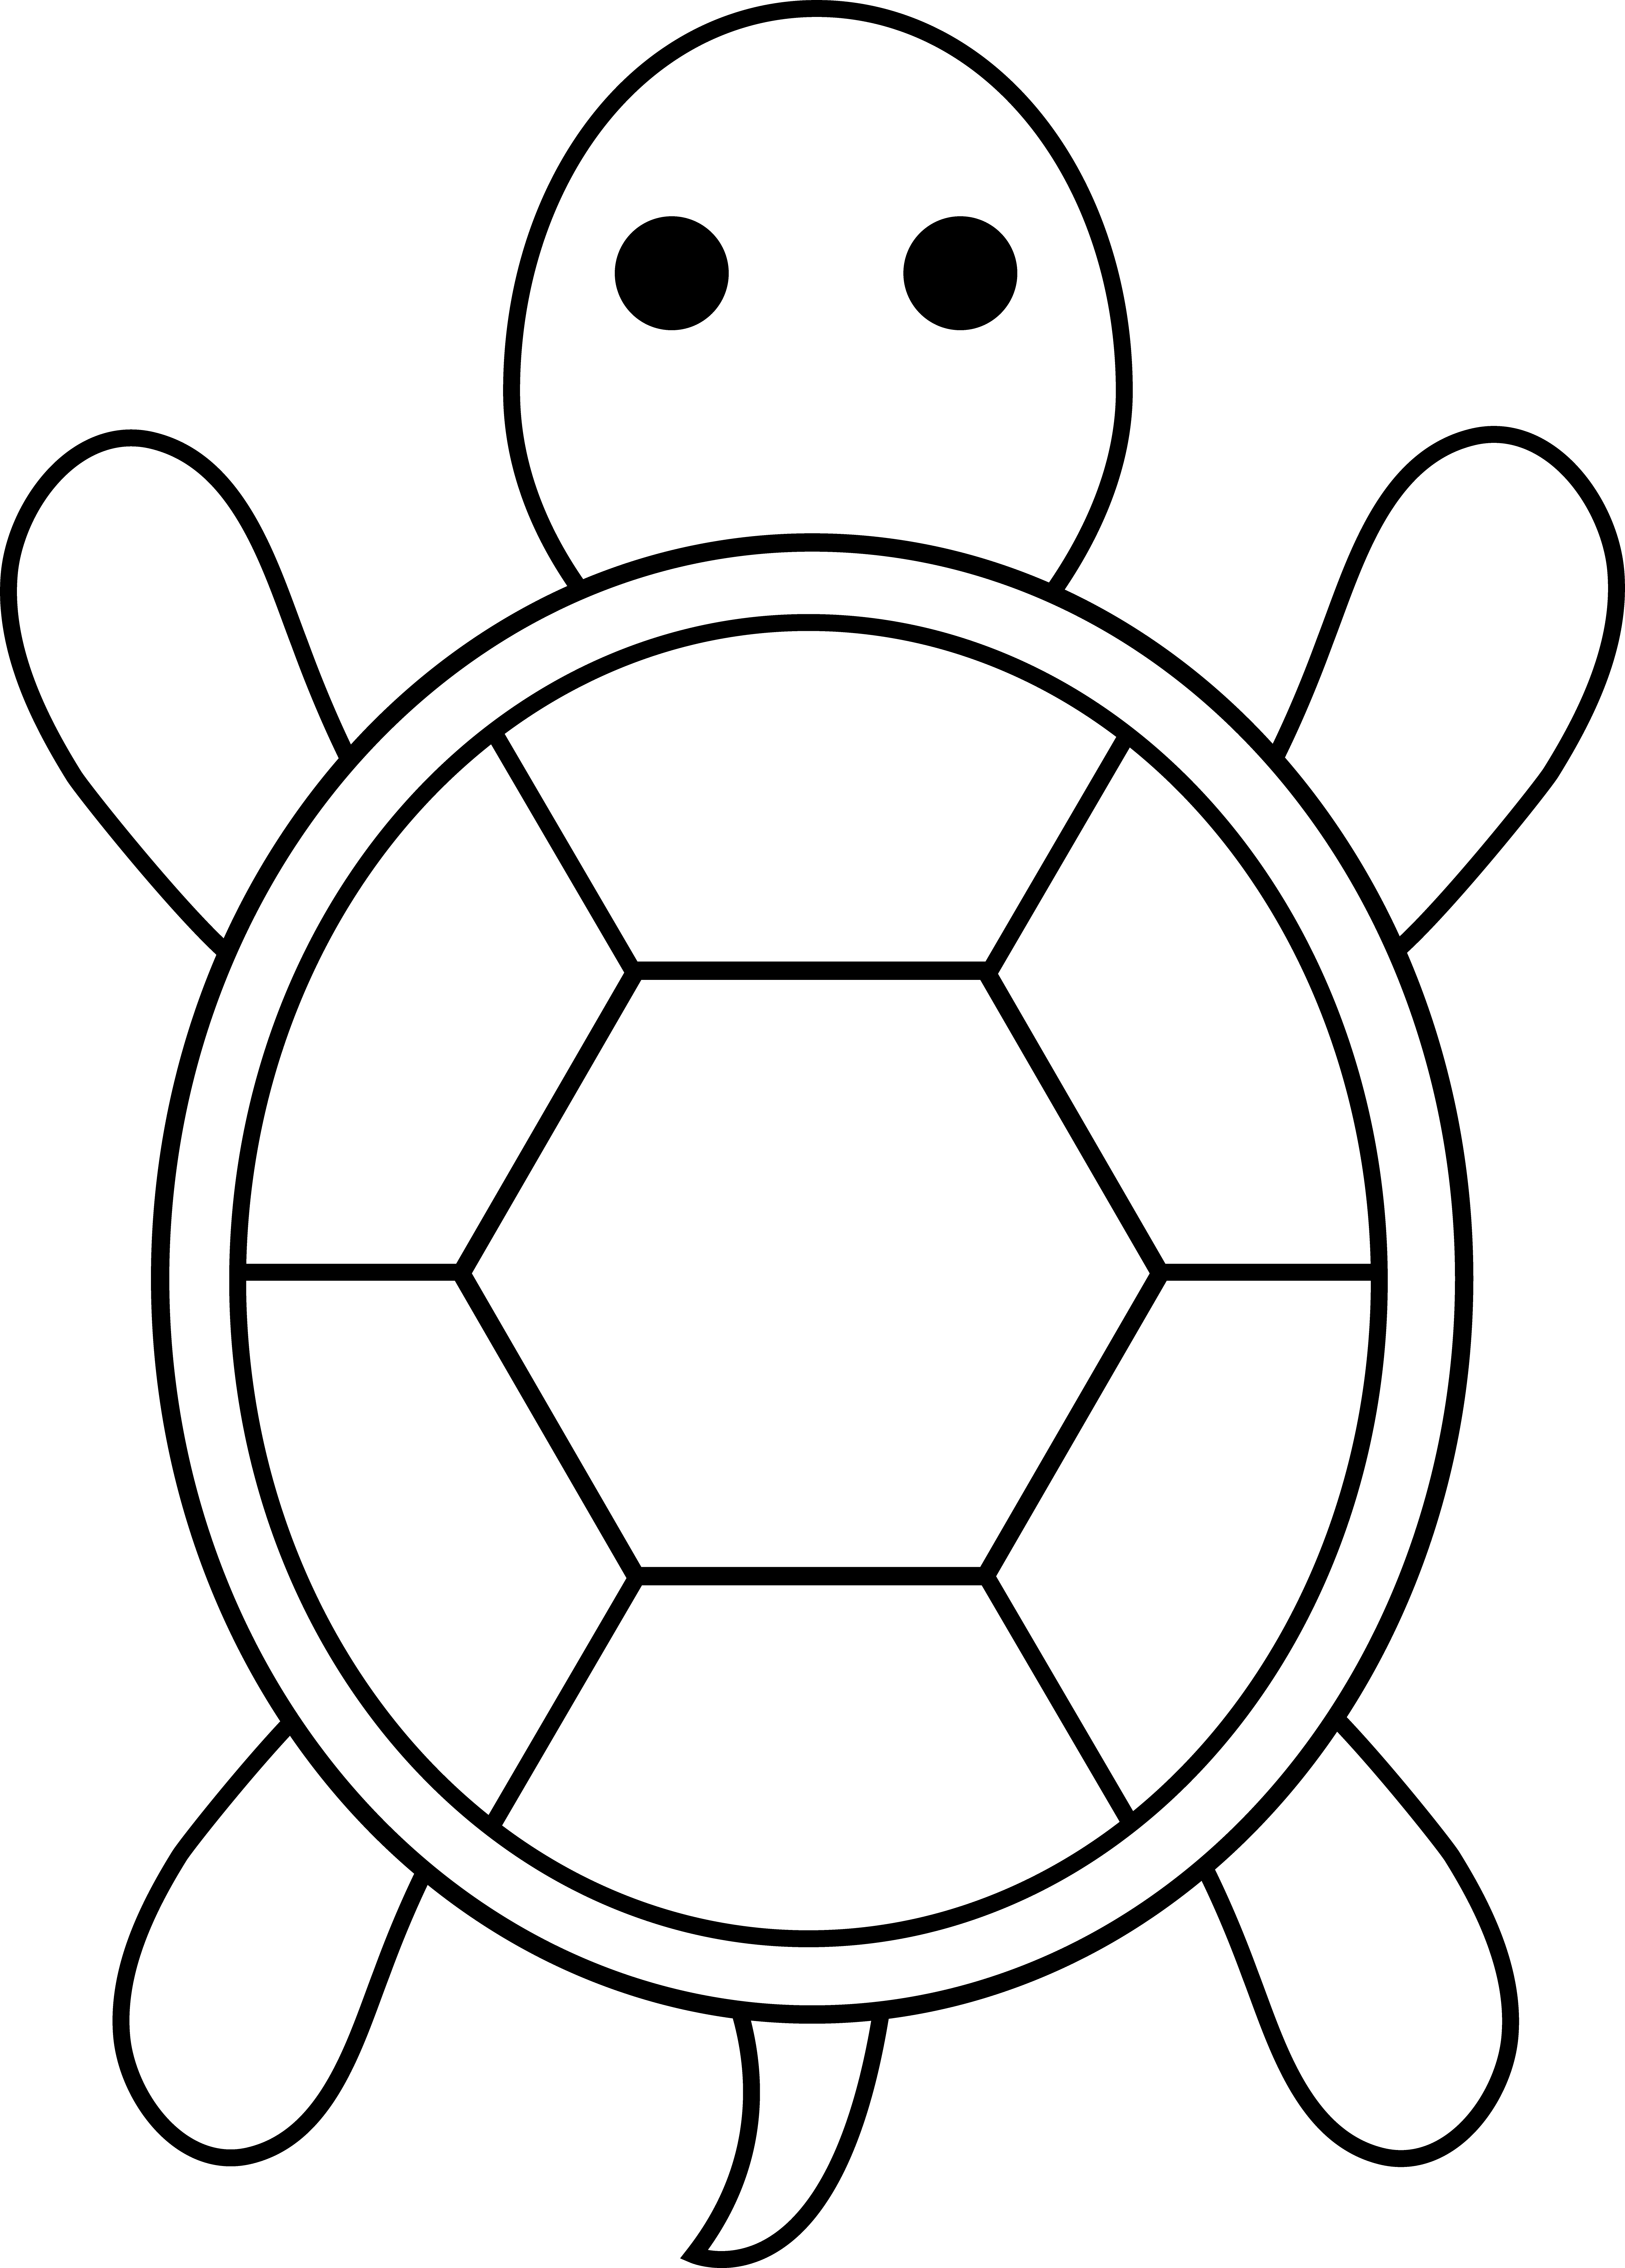 Turtle shell clipart free